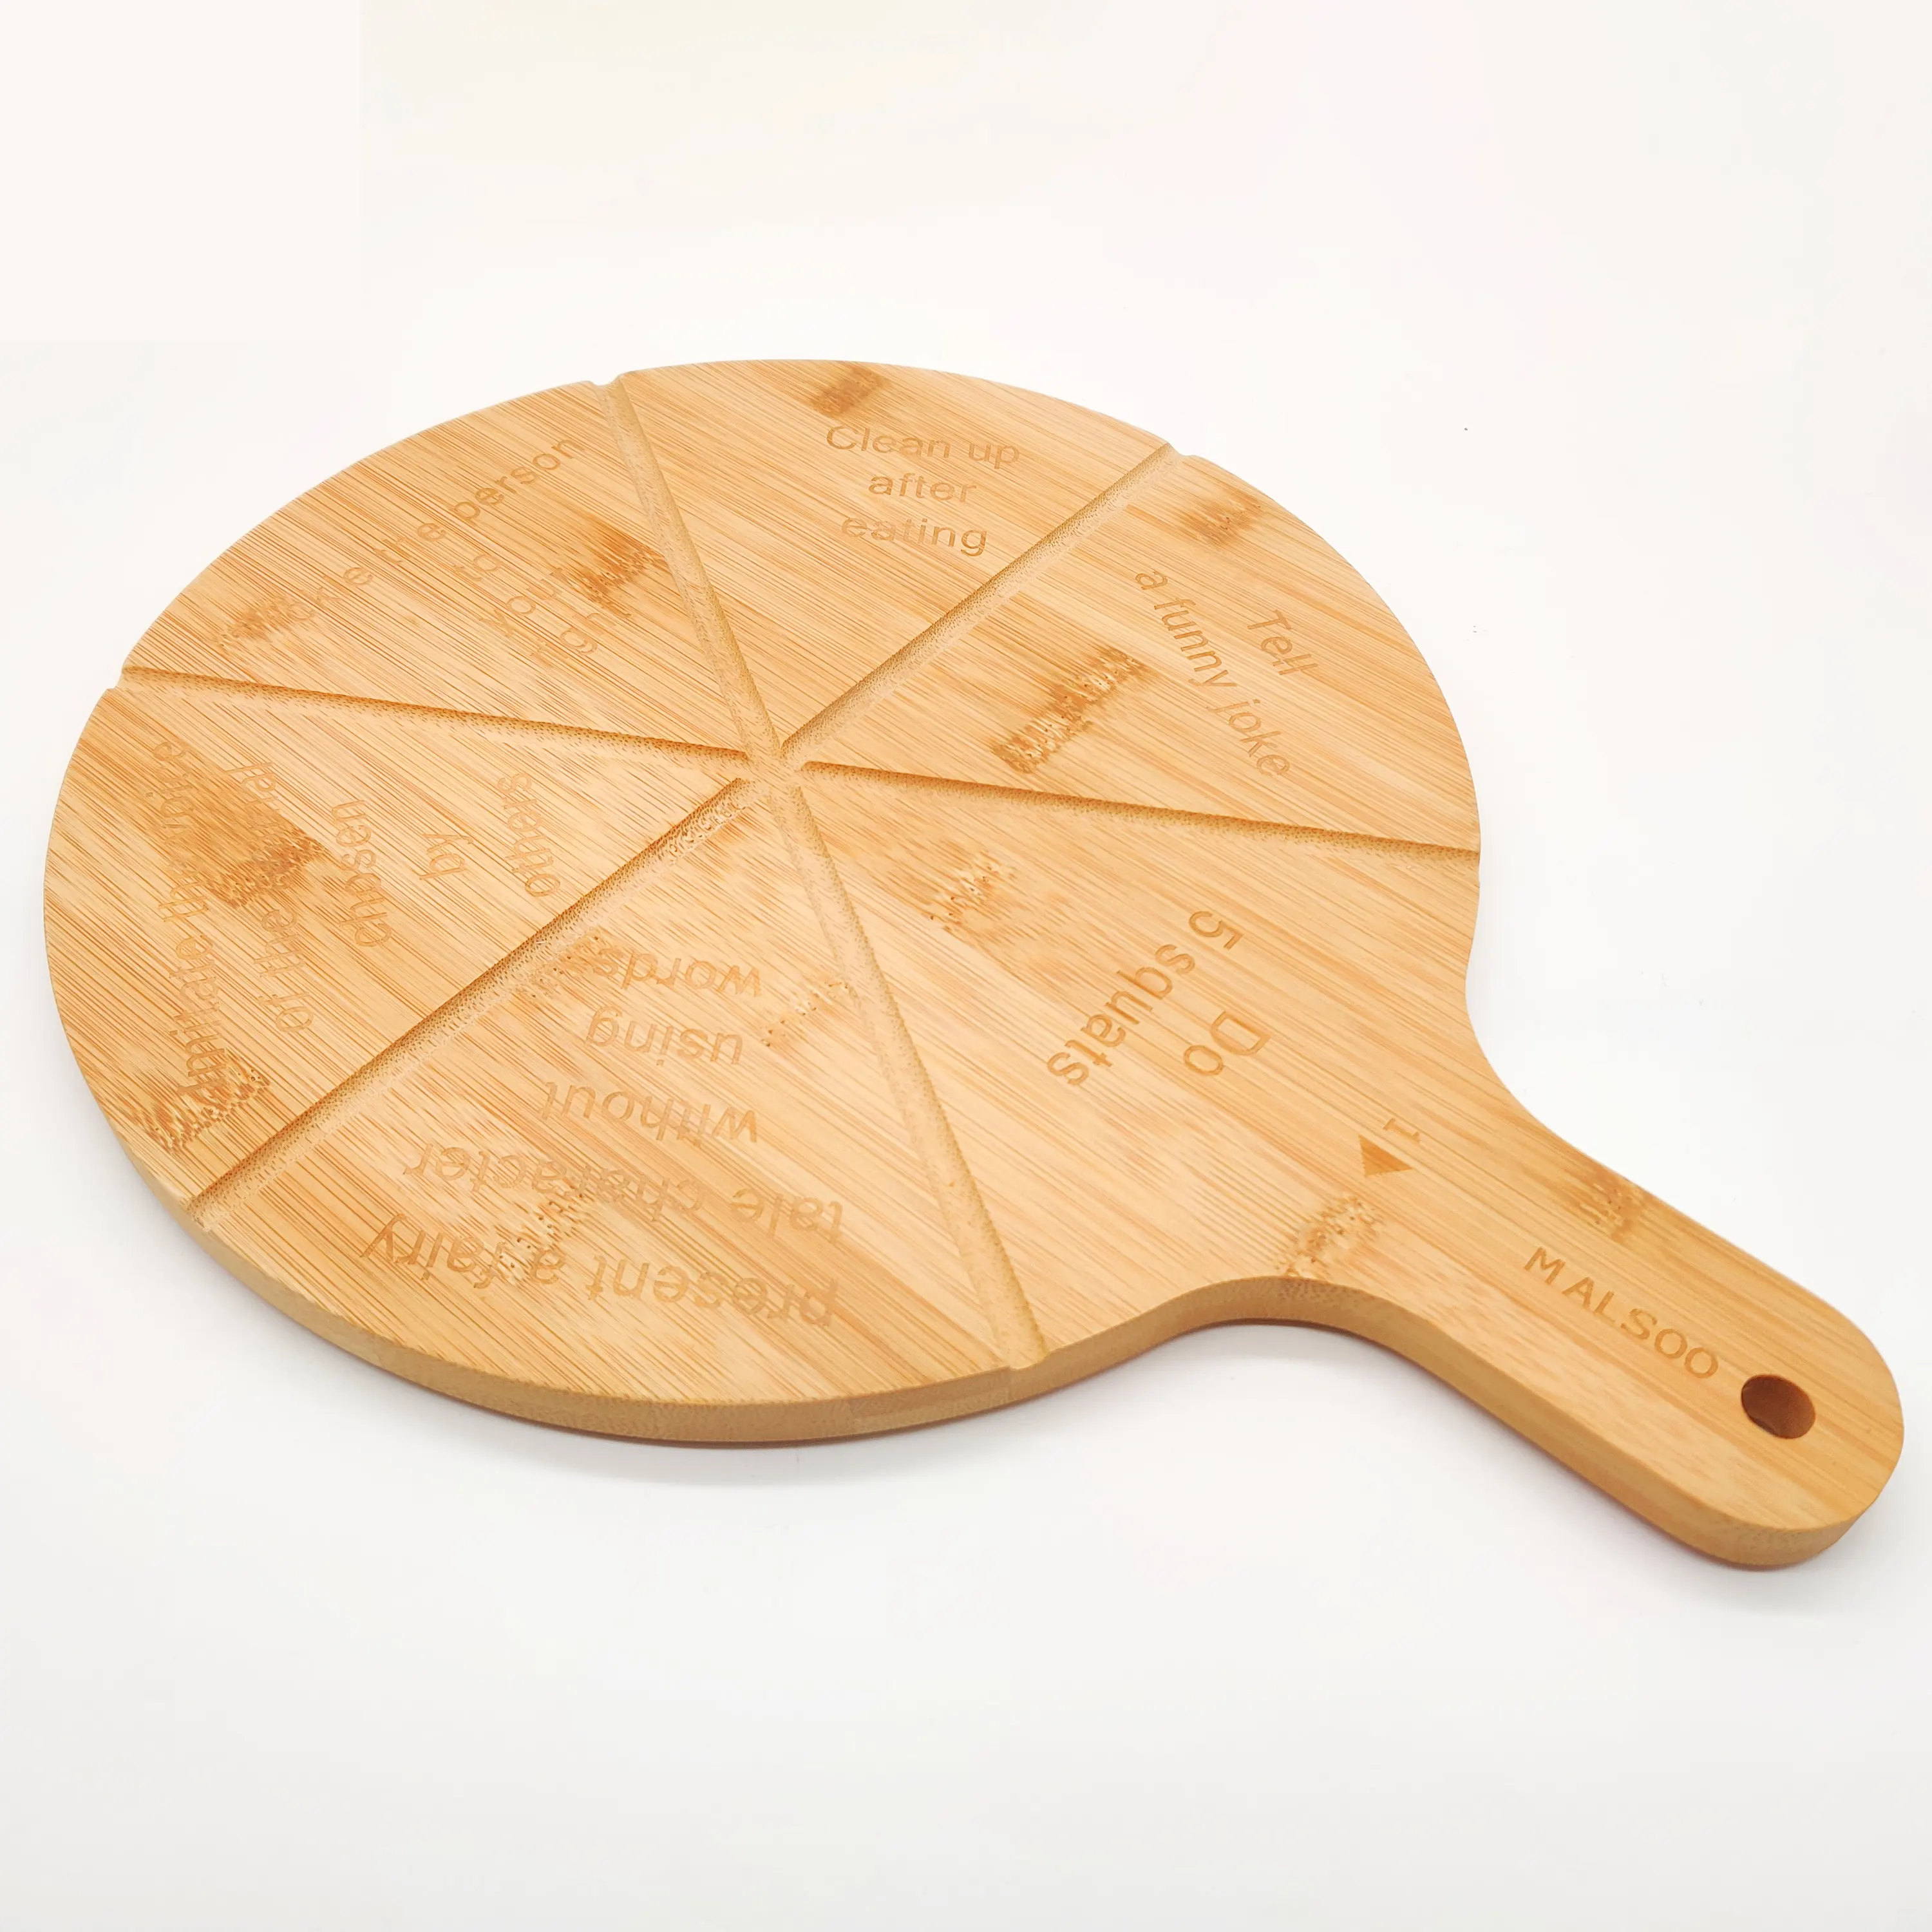 Luxury wooden pizza dishes tray charger plates wedding decorative wholesale bulk wooden plate acacia wood charger plate for food